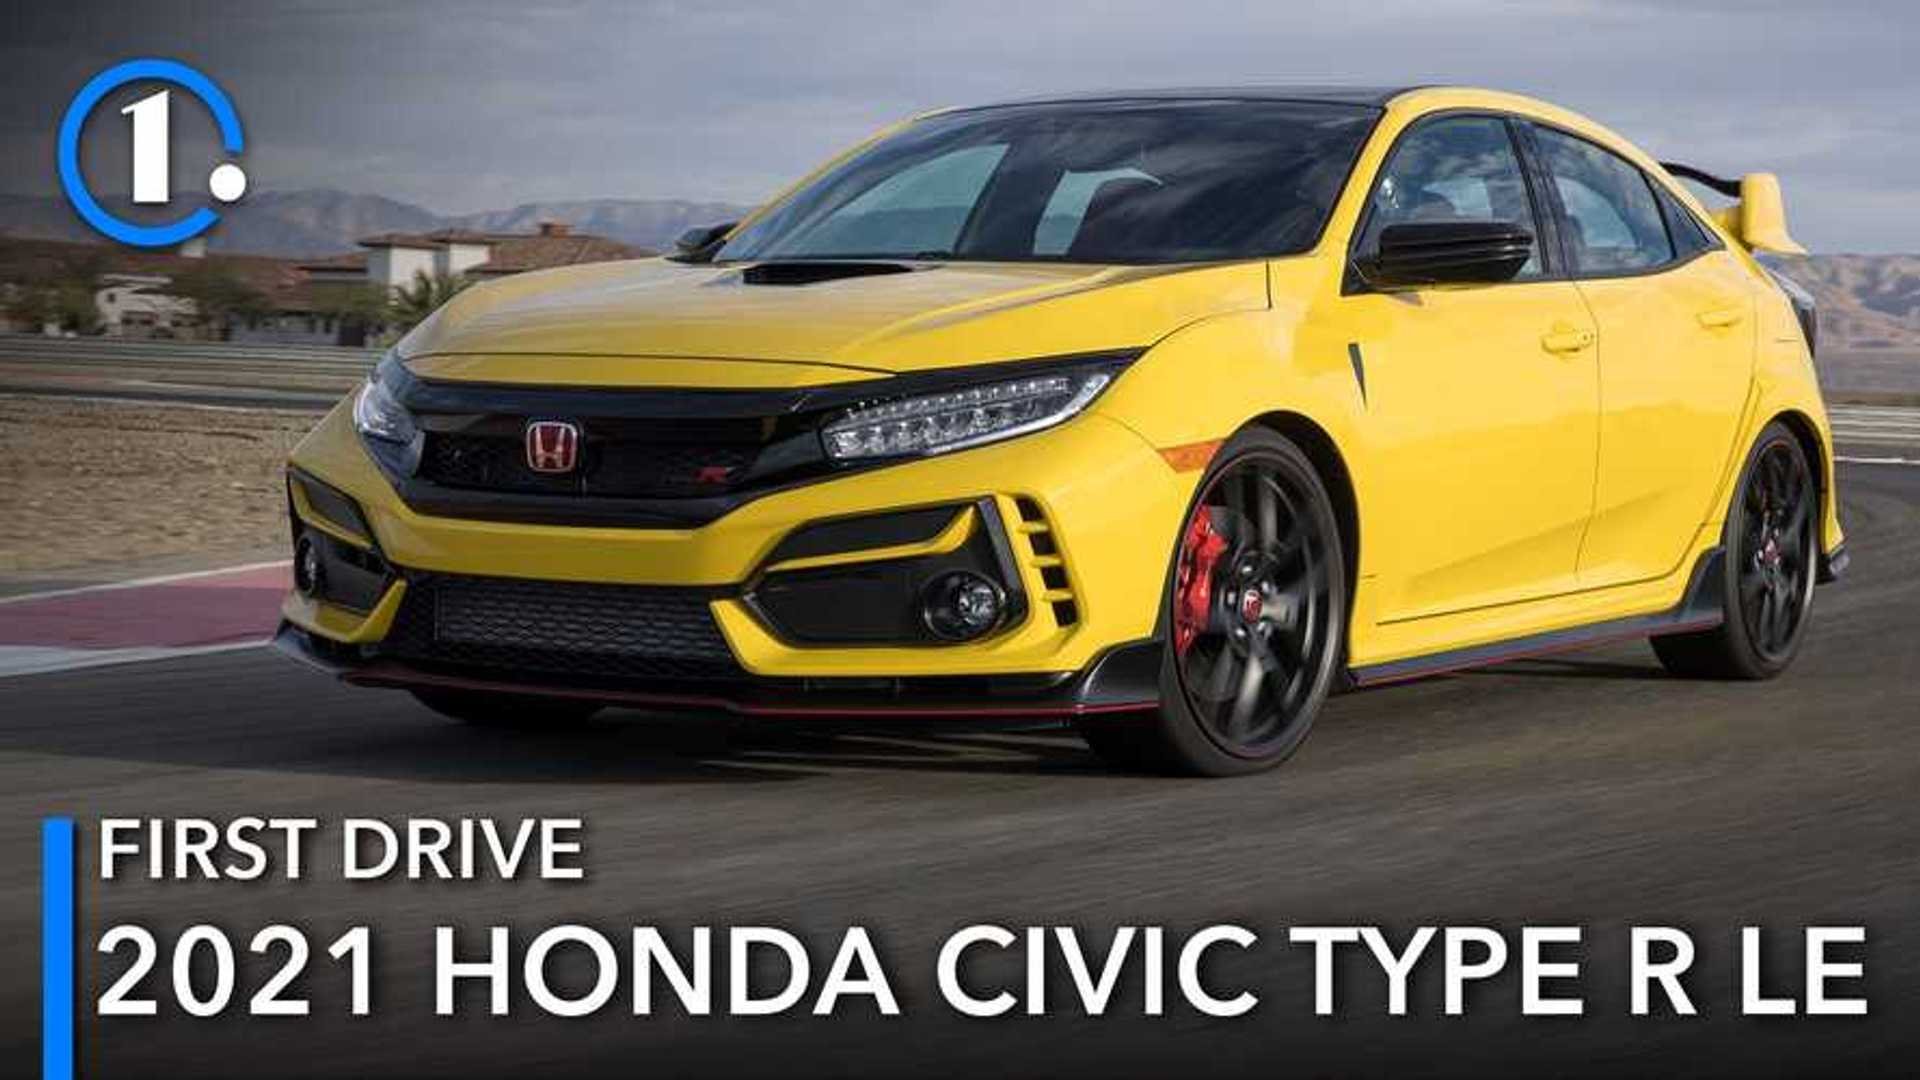 2021 Honda Civic Type R Limited Edition First Drive Review: Weapon Of Choice